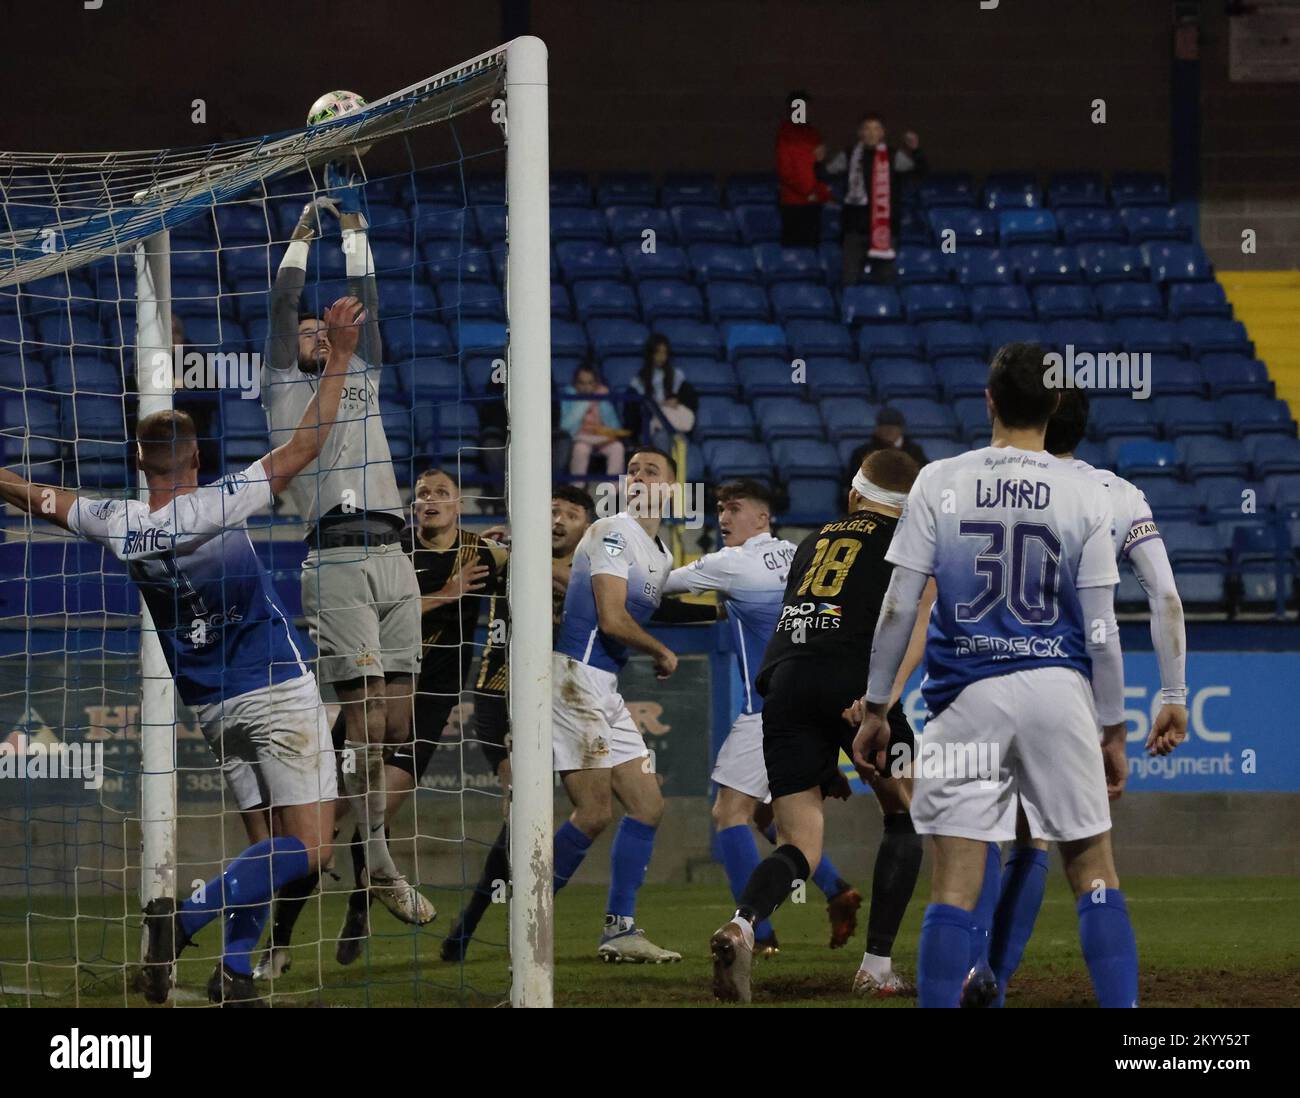 Mourneview Park, Lurgan, County Armagh, Northern Ireland, UK. 2 Dec 2022. Danske Bank Premiership – Glenavon v Larne Action from tonight's game at Mourneview Park (Glenavon in blue). Glenavon goalkeeper Rory Brown pushes the ball up onto the crossbar in the second-half. Credit: CAZIMB/Alamy Live News. Stock Photo